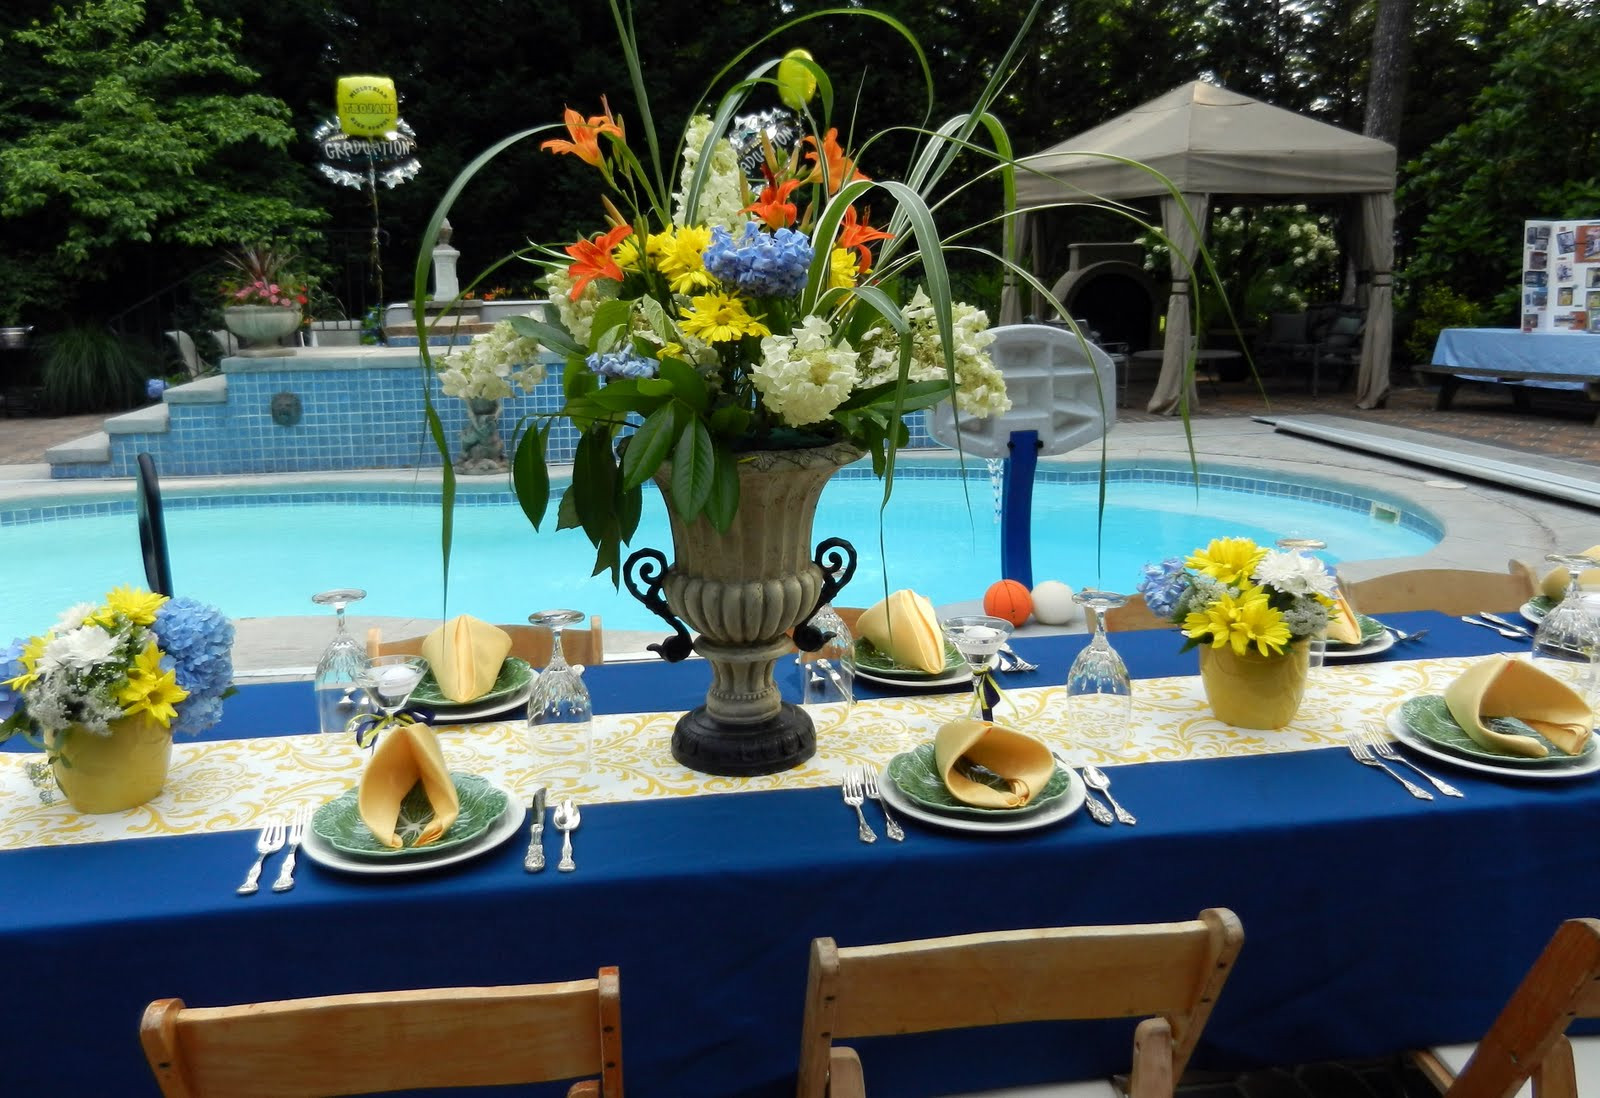 Graduation Party Table Setting Ideas
 A Perfect Setting A Setting for Graduation